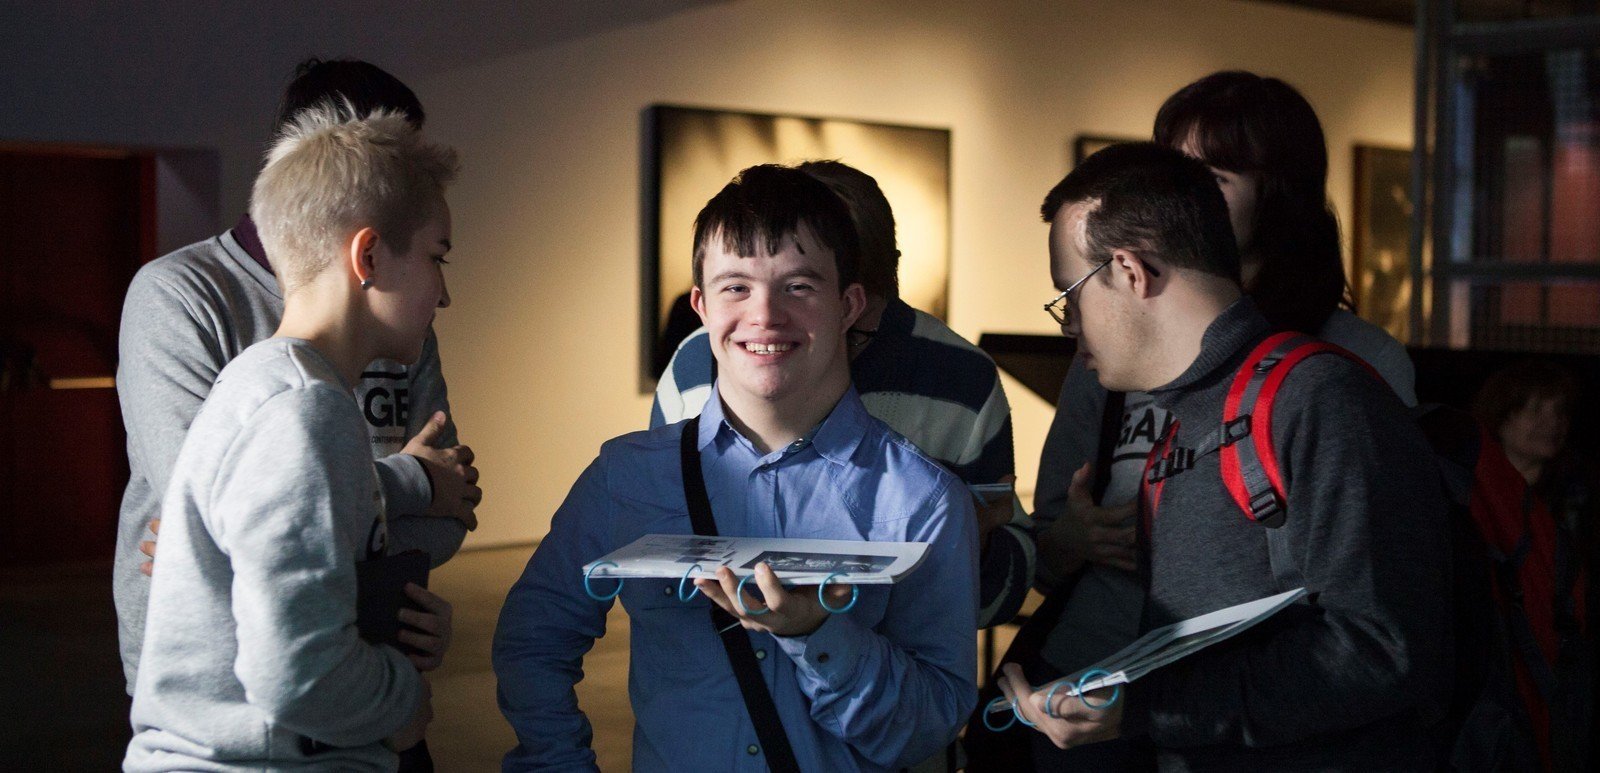 The Museum is Your Friend. Training Course for Visitors with Developmental Disabilities